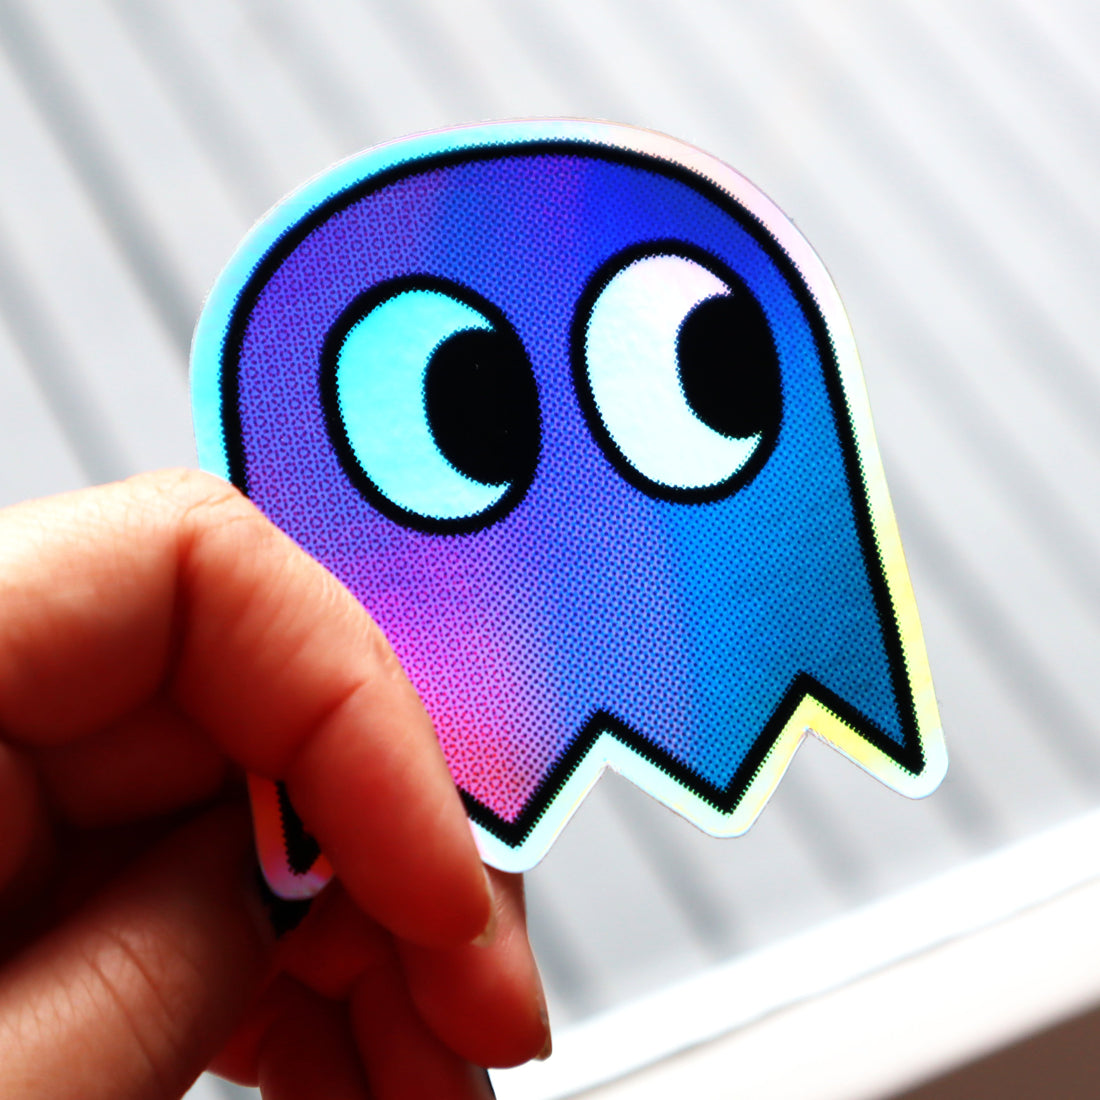 A sticker depicting a gamer-style pixel ghost in bisexual flag colours.